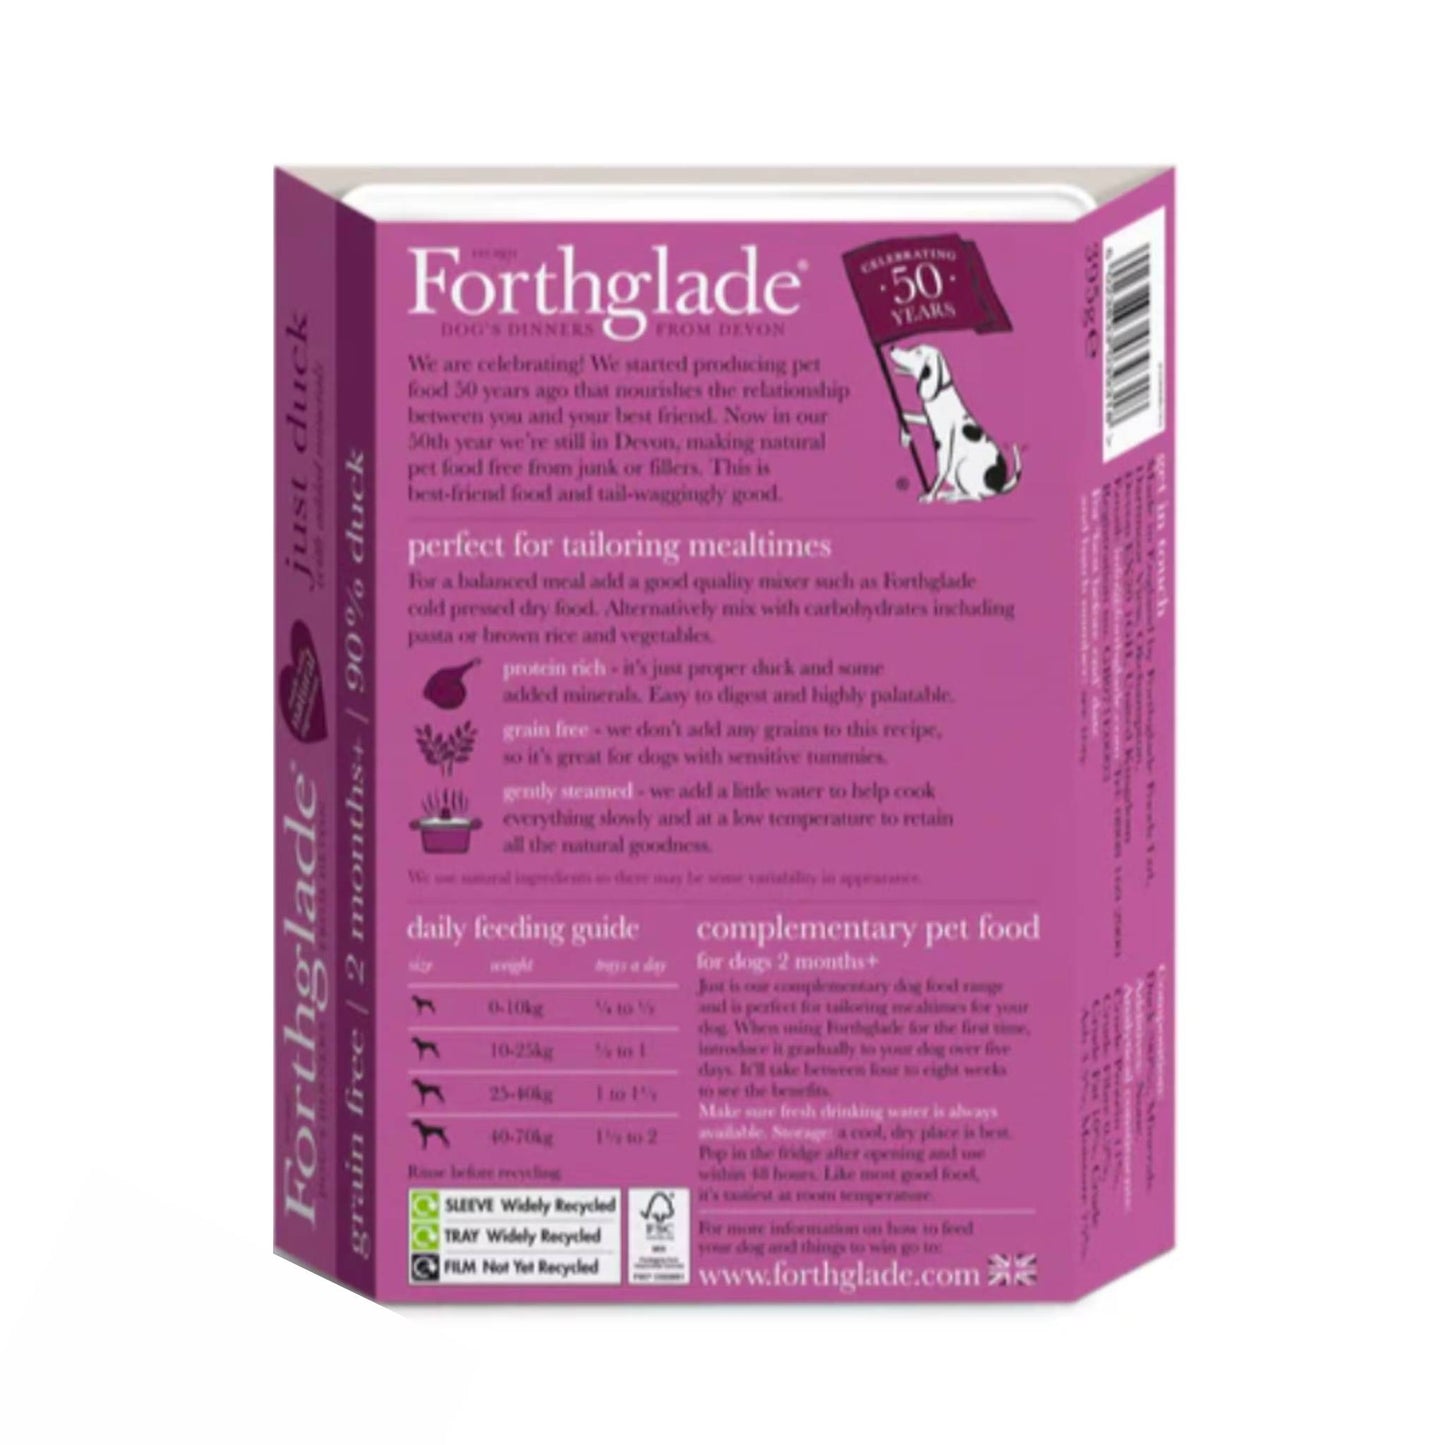 Forthglade Just Duck ingredients and feeding guide. 